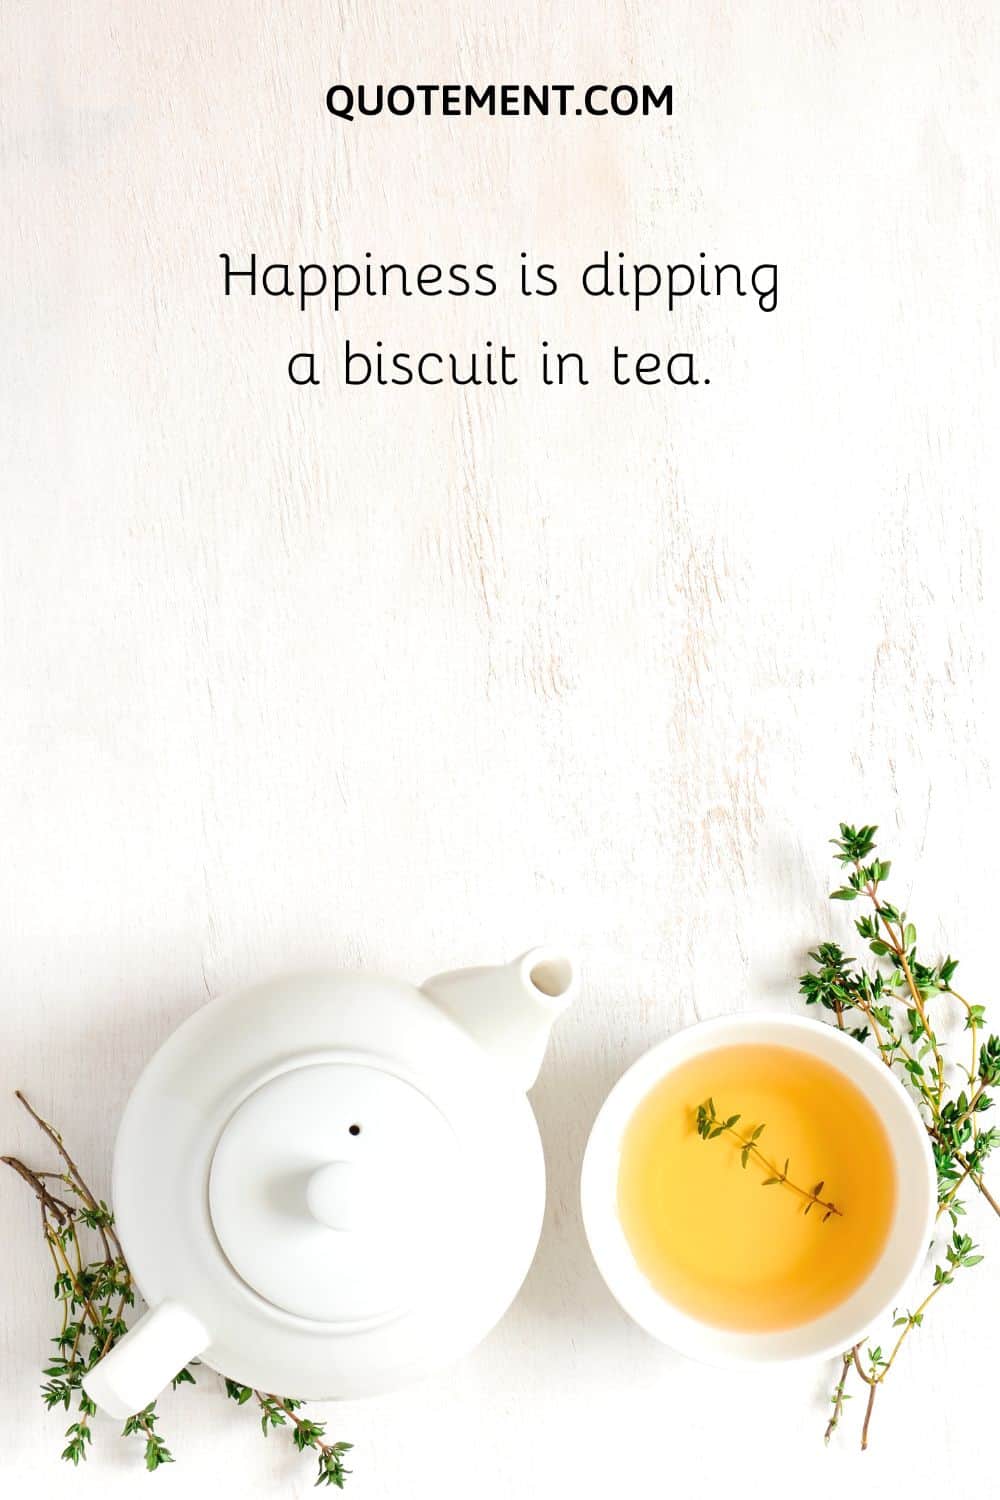 Happiness is dipping a biscuit in tea.